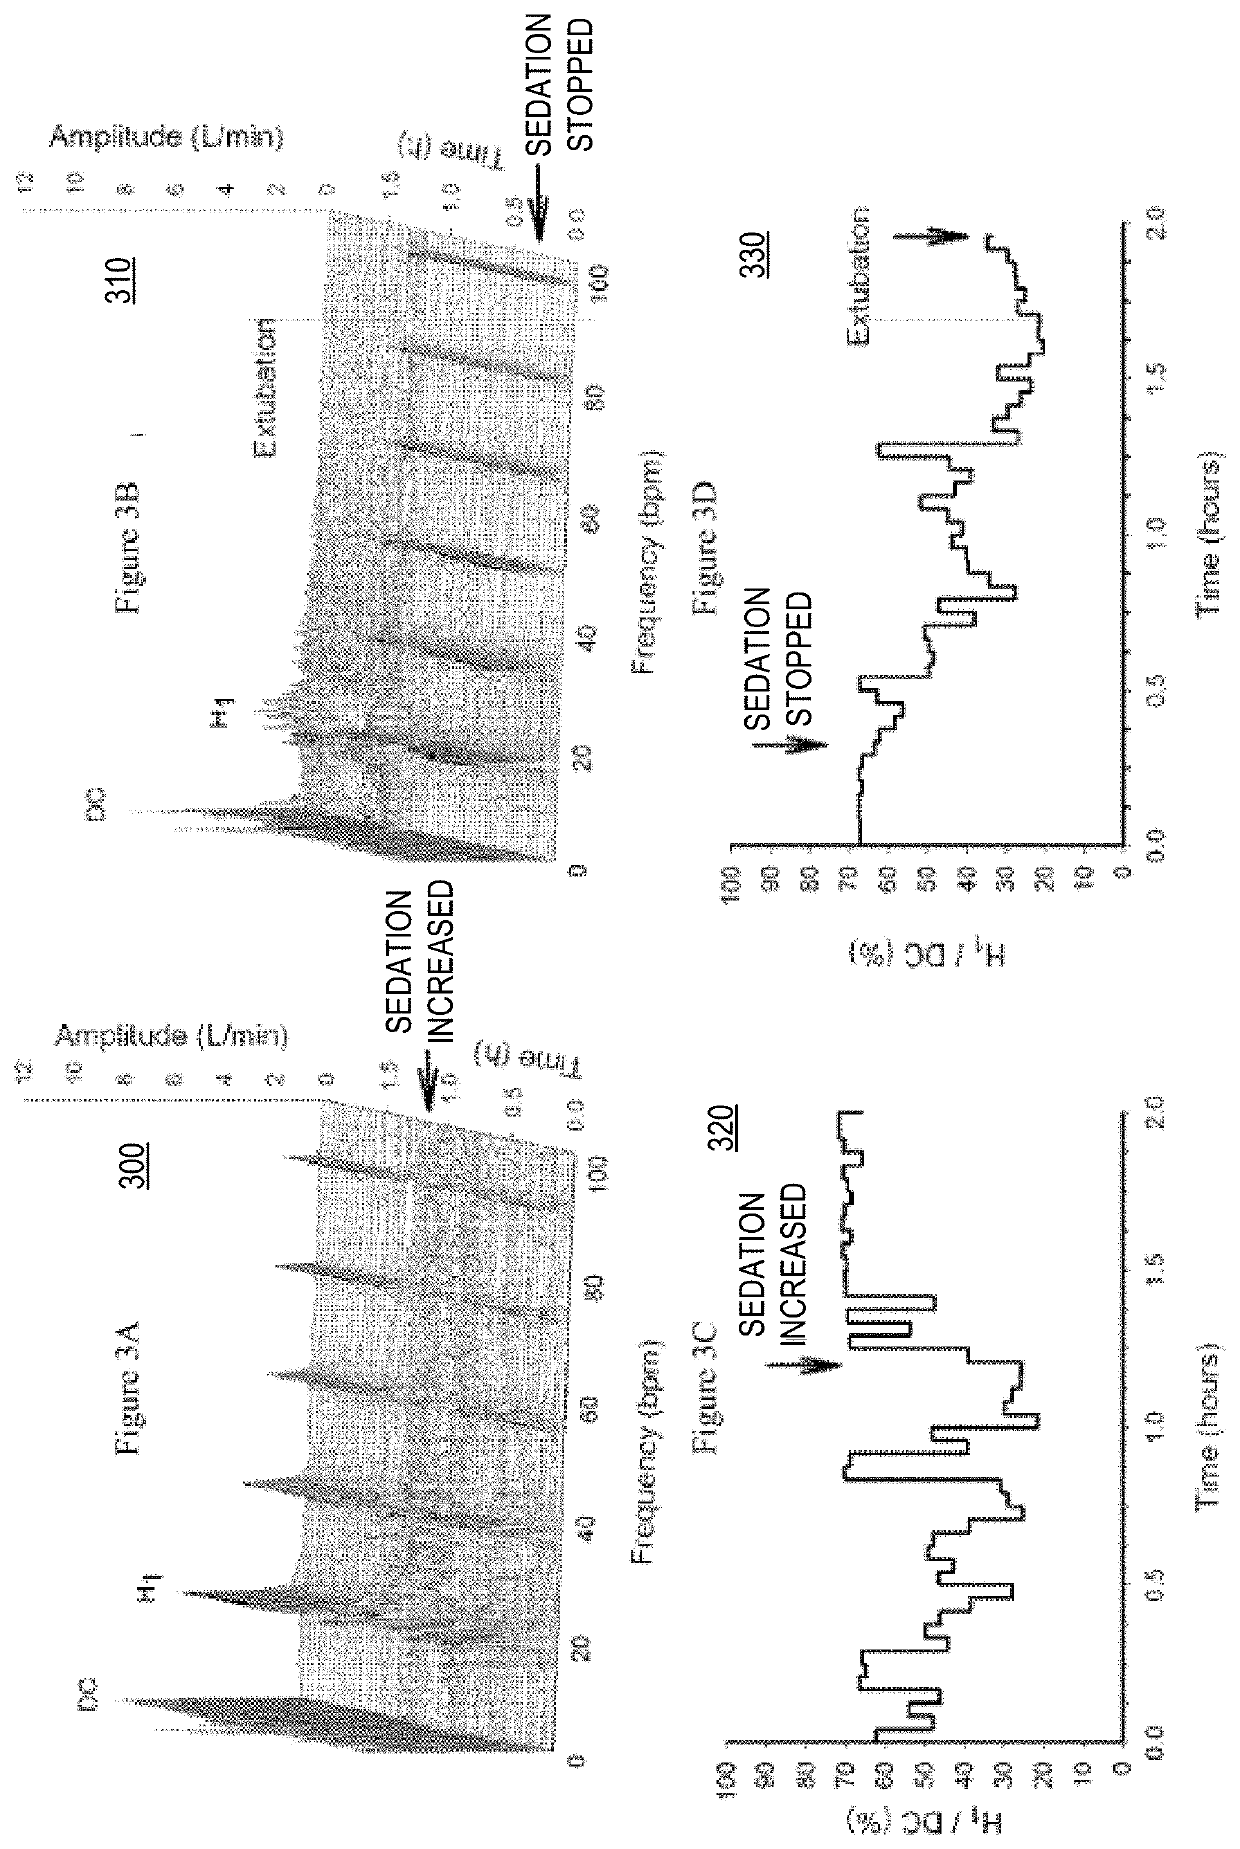 Detection and Display of Respiratory Rate Variability, Mechanical Ventilation Machine Learning, and Double Booking of Clinic Slots, System, Method, and Computer Program Product